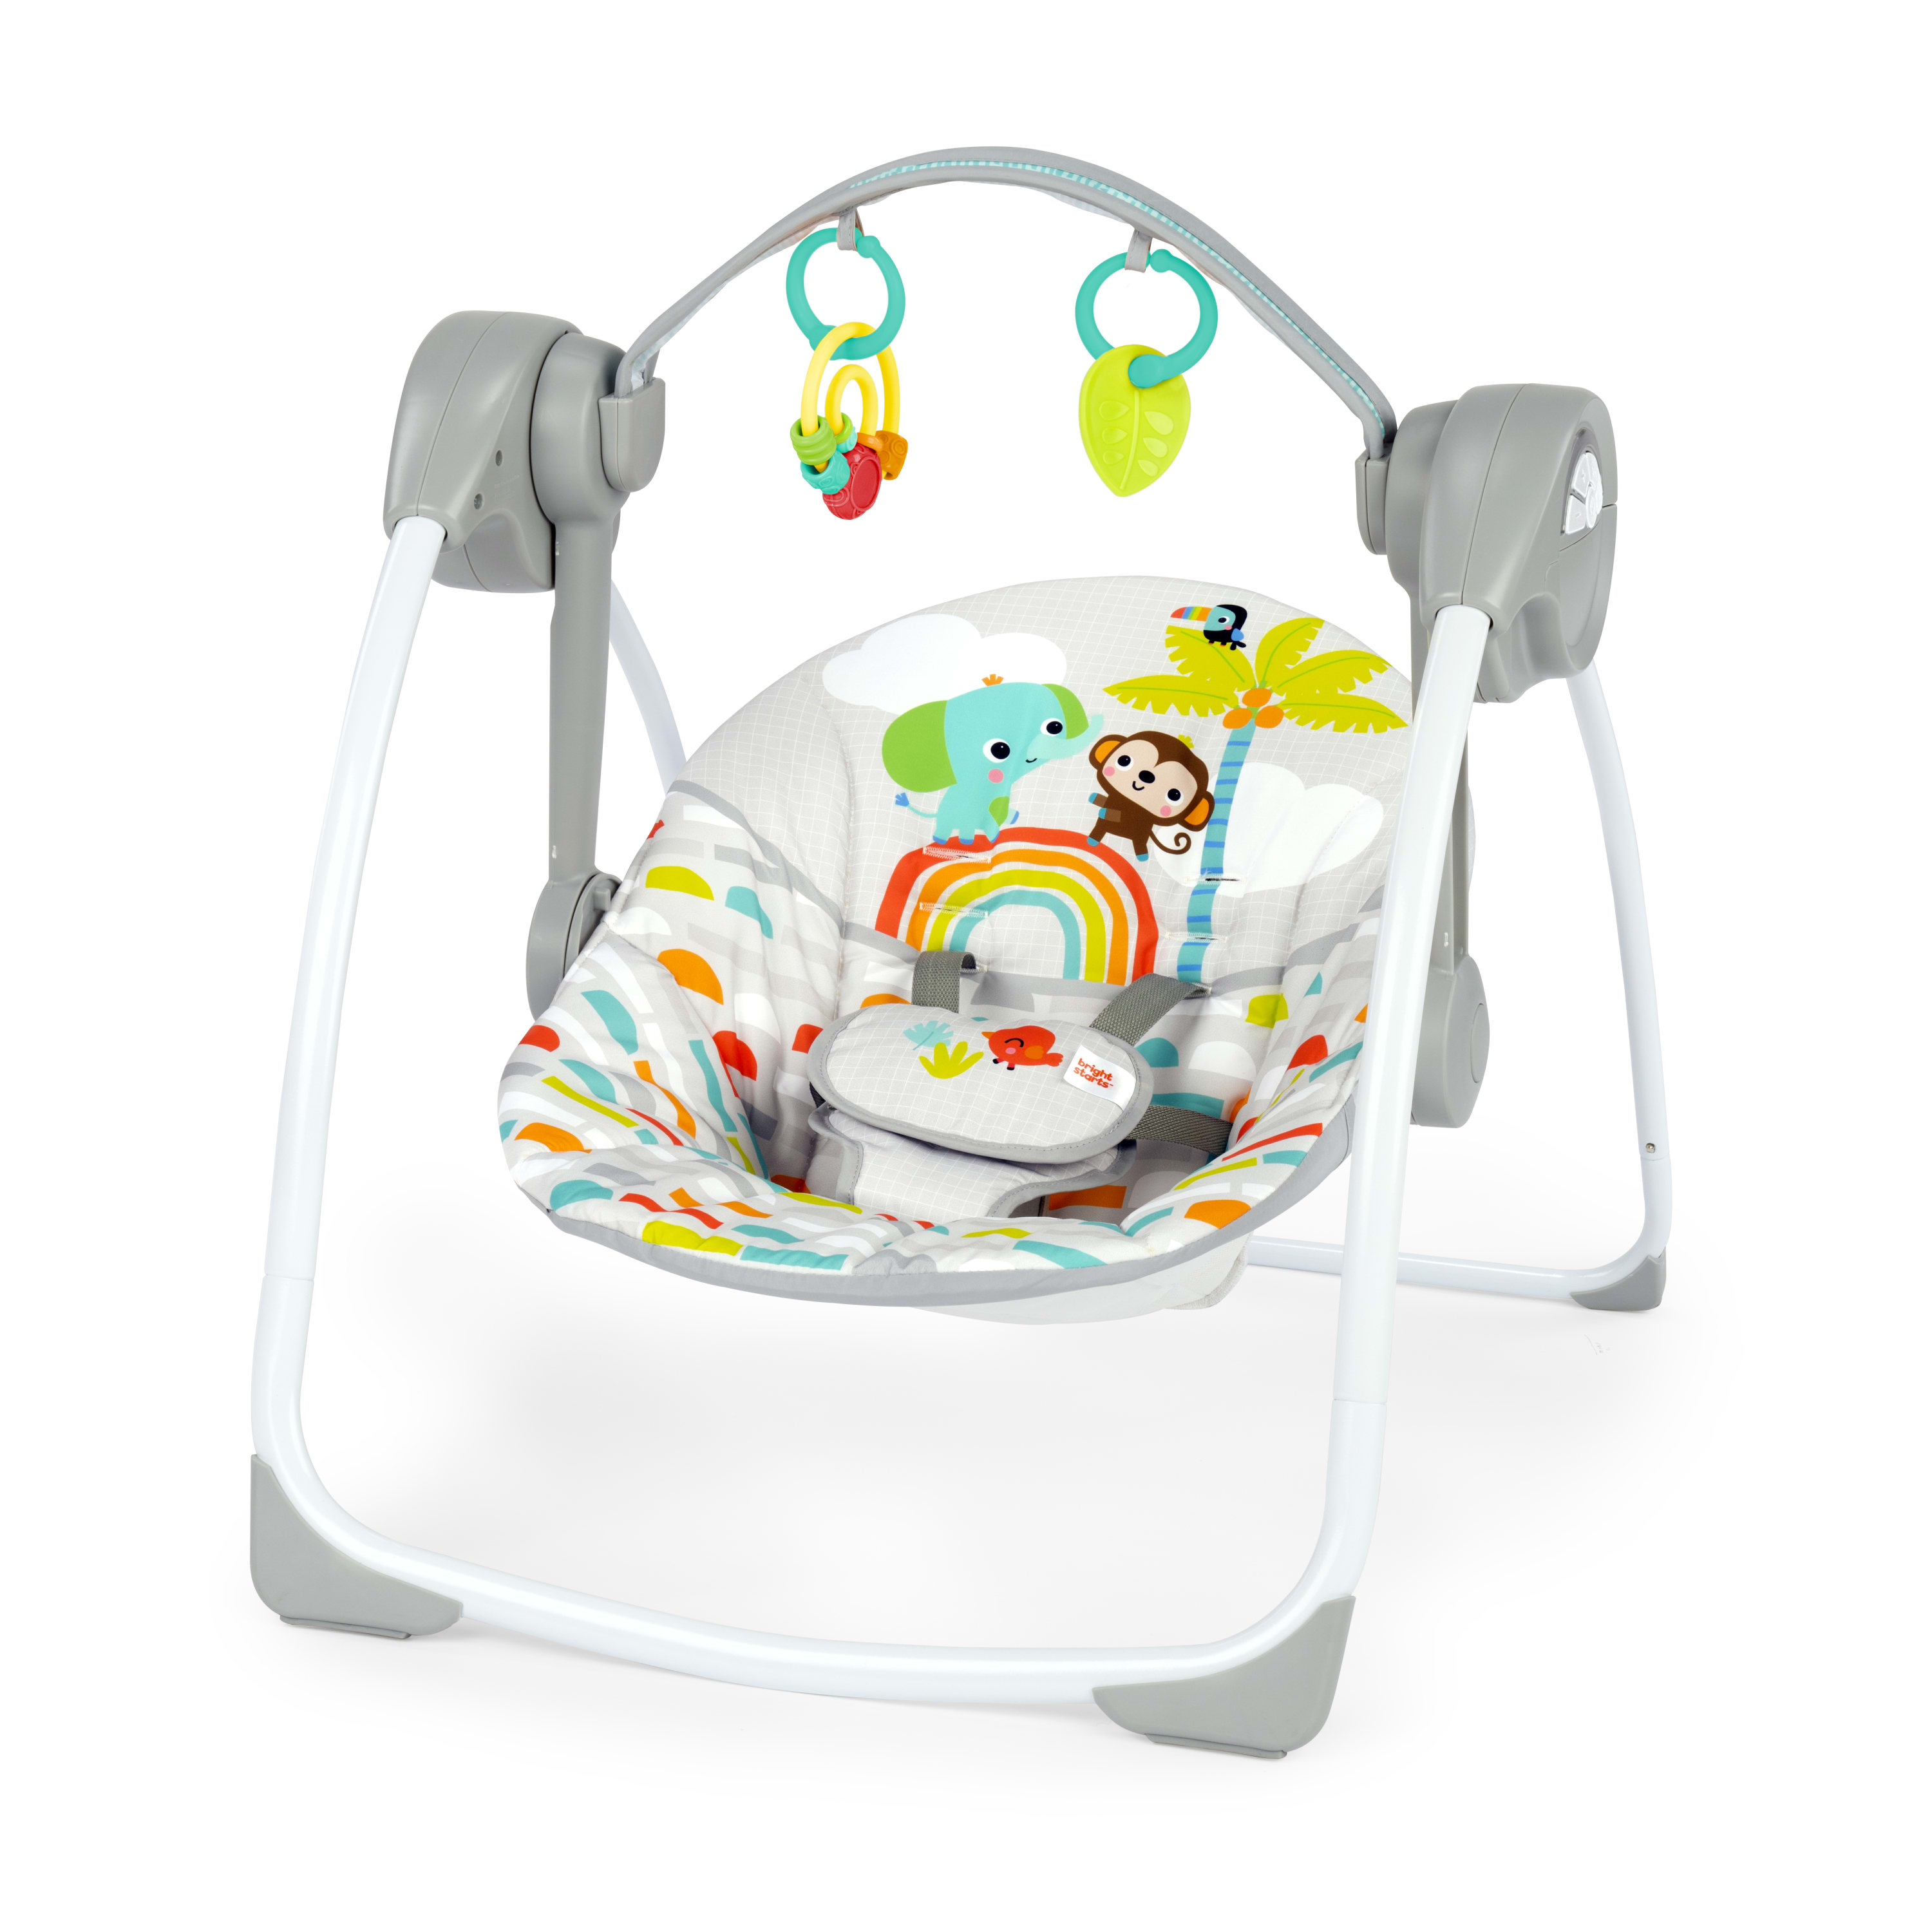 Bright Starts Playful Paradise Portable Compact Baby Swing with Toys, Unisex, Newborn + - image 1 of 18